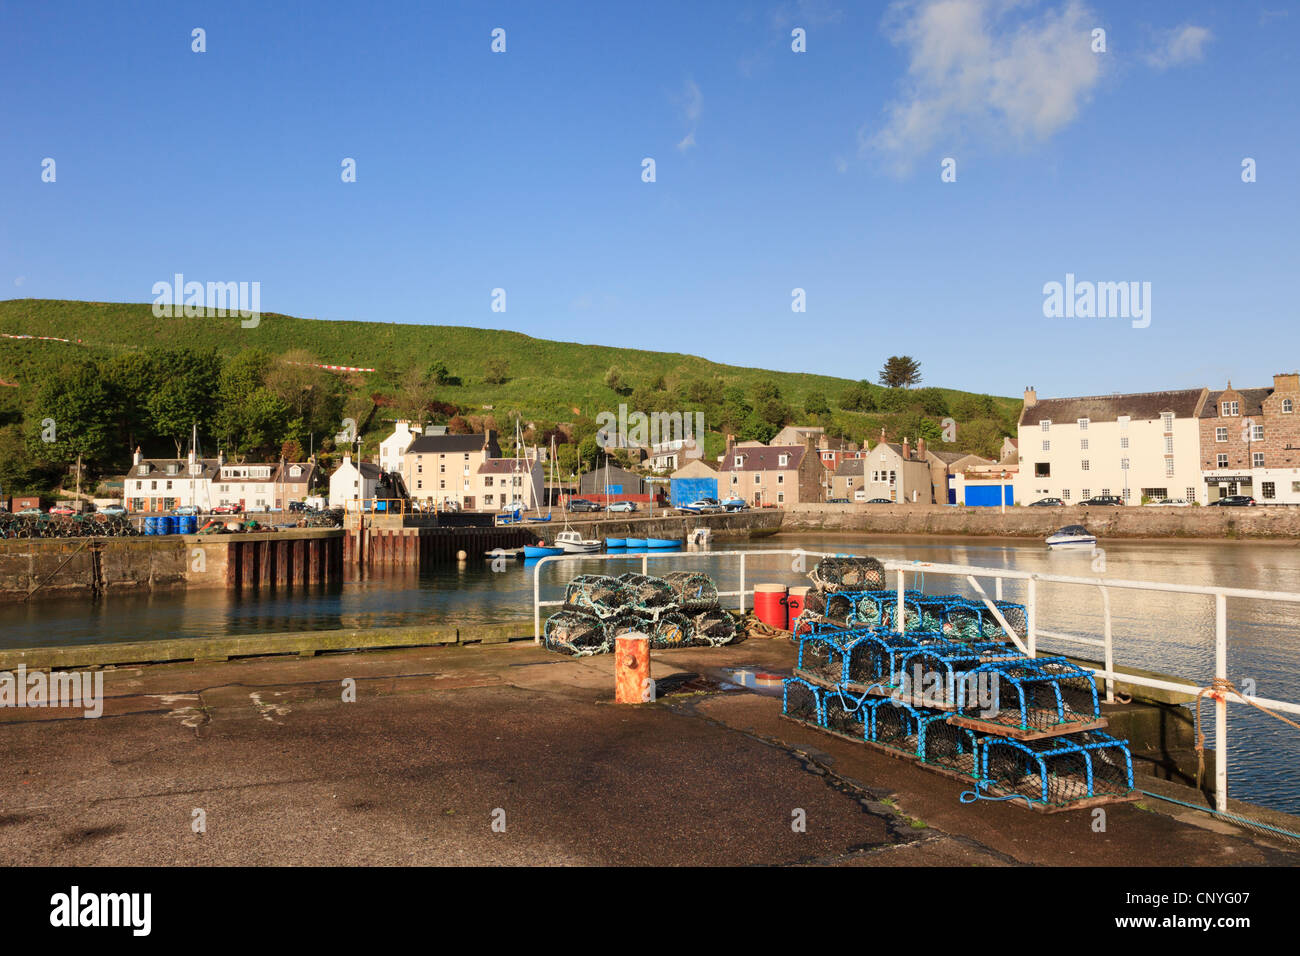 Lobster pots on the quayside of the small fishing port and harbour at Stonehaven, Aberdeenshire, Scotland, UK. Stock Photo